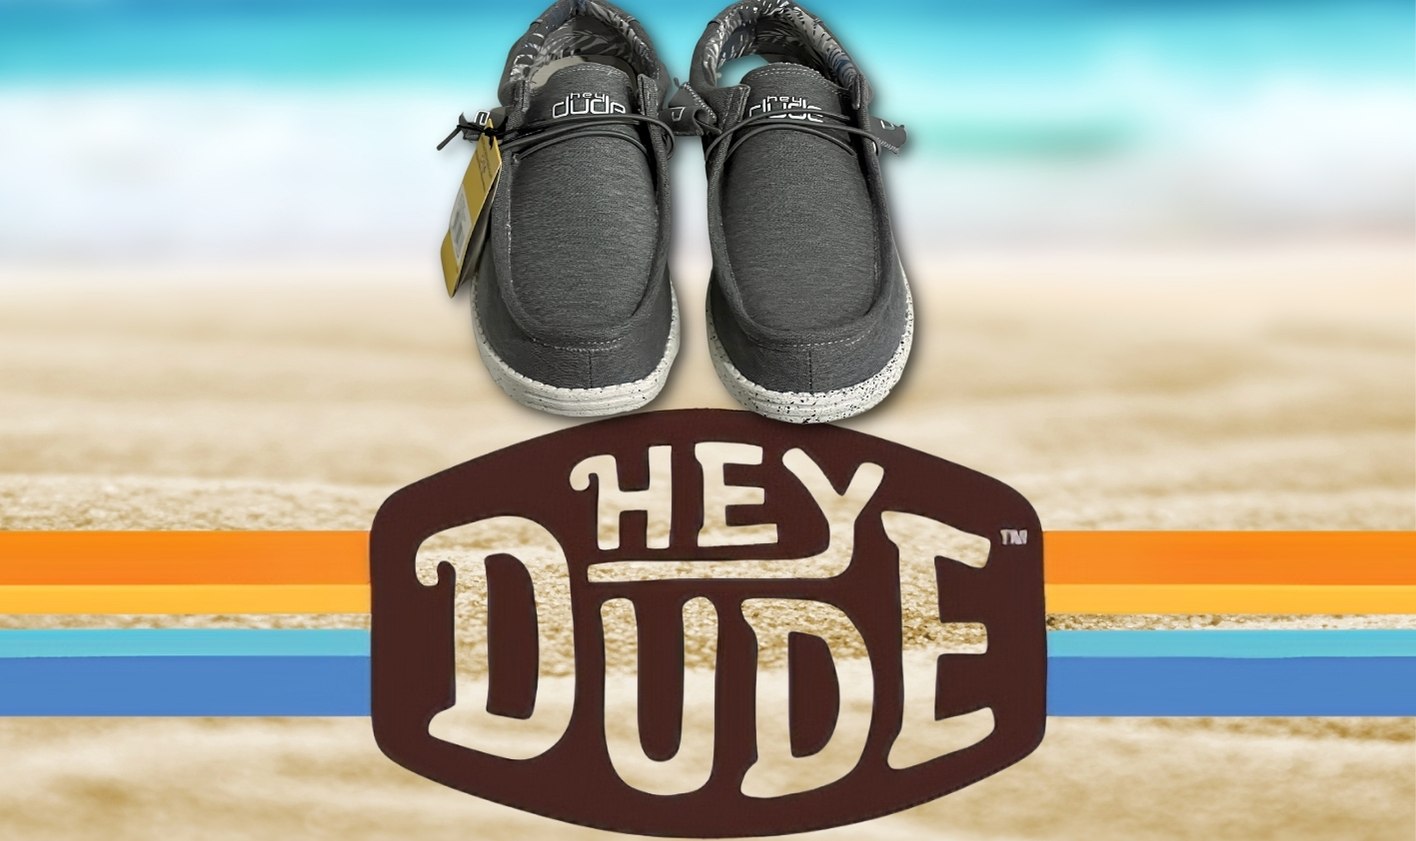 Hey Dude Shoes Review: Read this before buying the hype - We Tried It